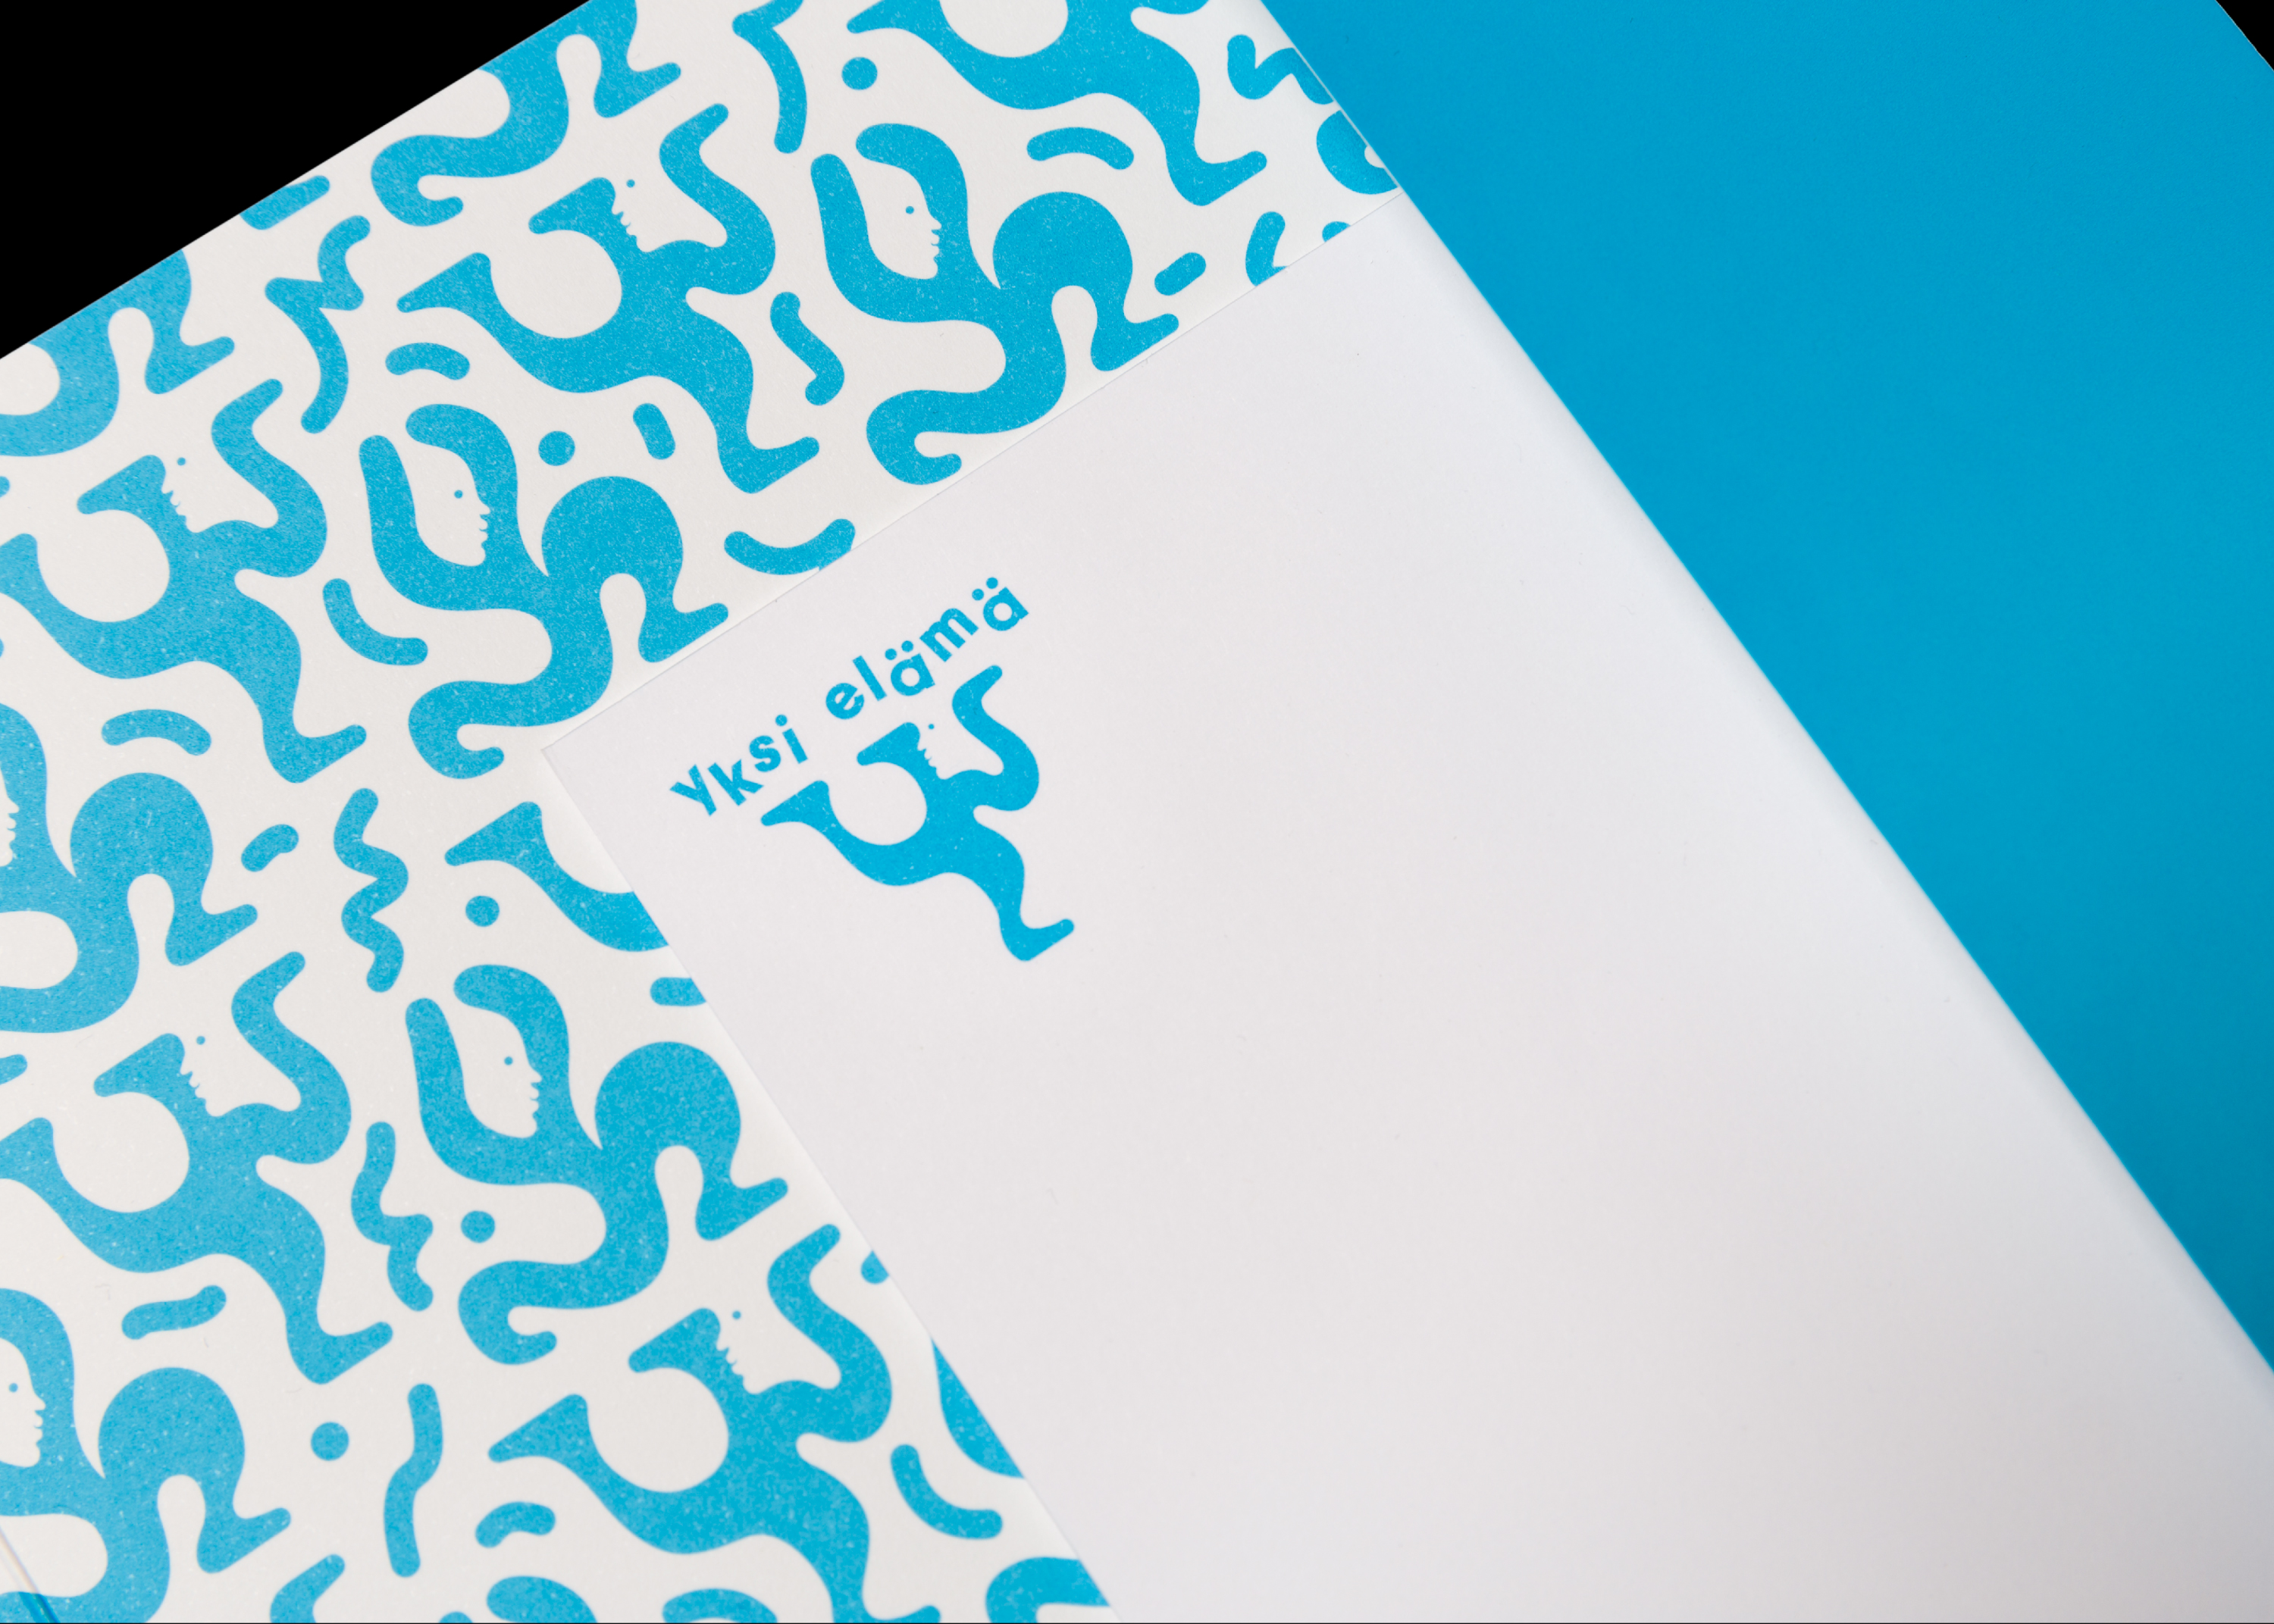 Logo and stationery designed by Tsto for Finnish health and wellbeing project Yksi Elämä. Featured on bpando.org